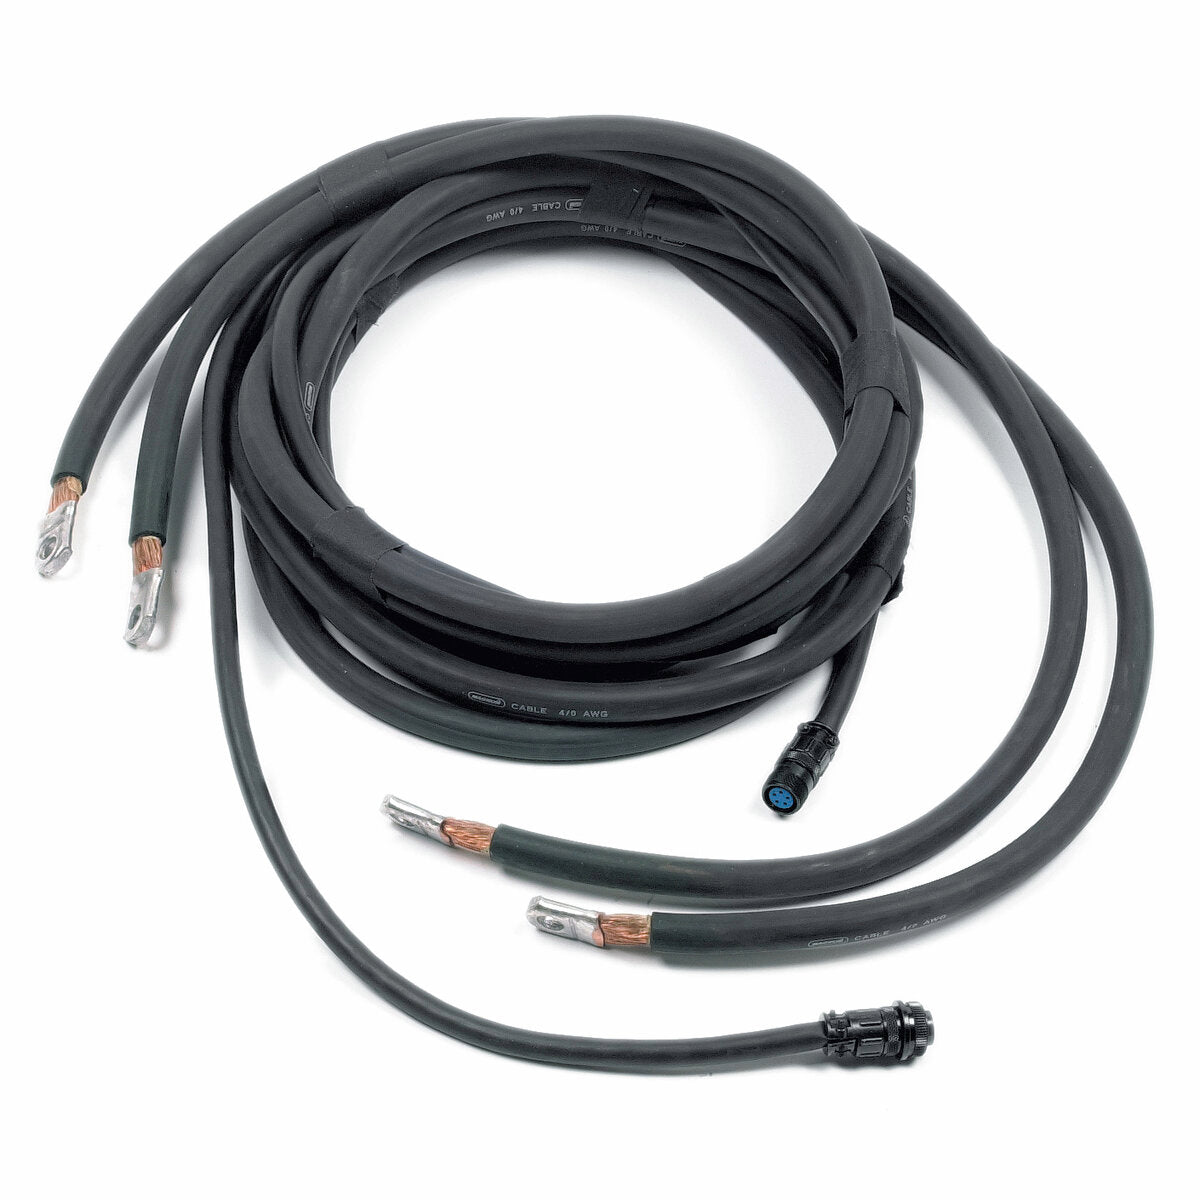 Lincoln Electric - Control to Head Extension Cable - 26 ft (8 m) - K234-26